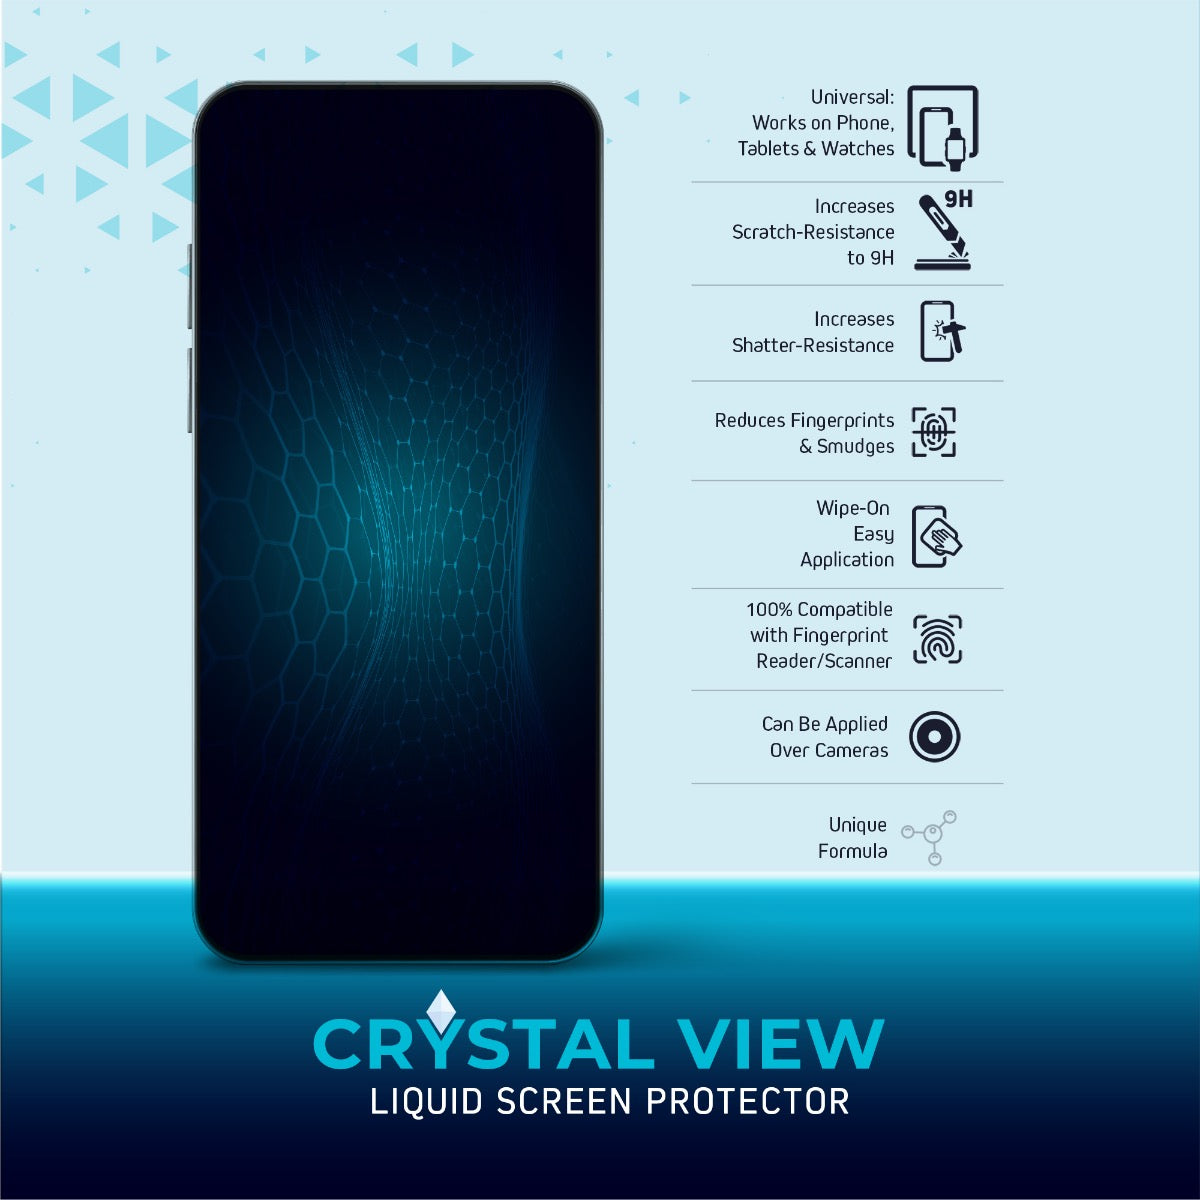 CRYSTAL VIEW Liquid Screen Protector for All Phones Tablets and Smart Watches